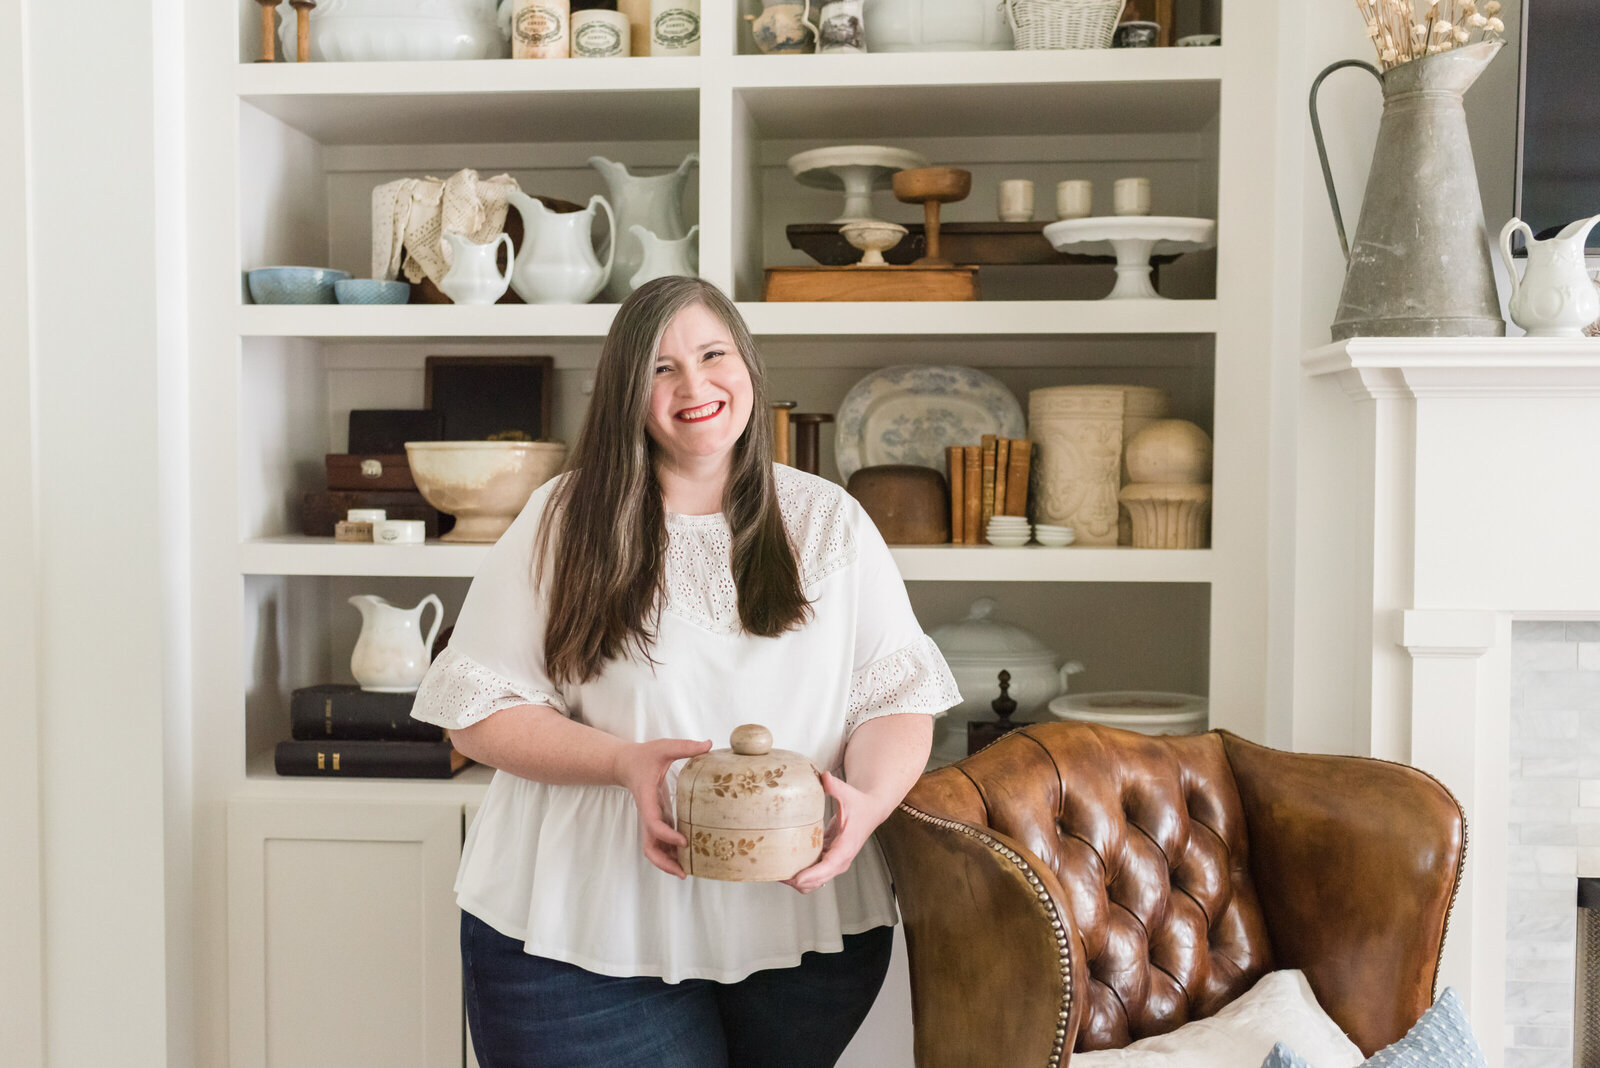 Lauren smiles in front of shelves of her antique collections, resting her arm on leather wingback chair